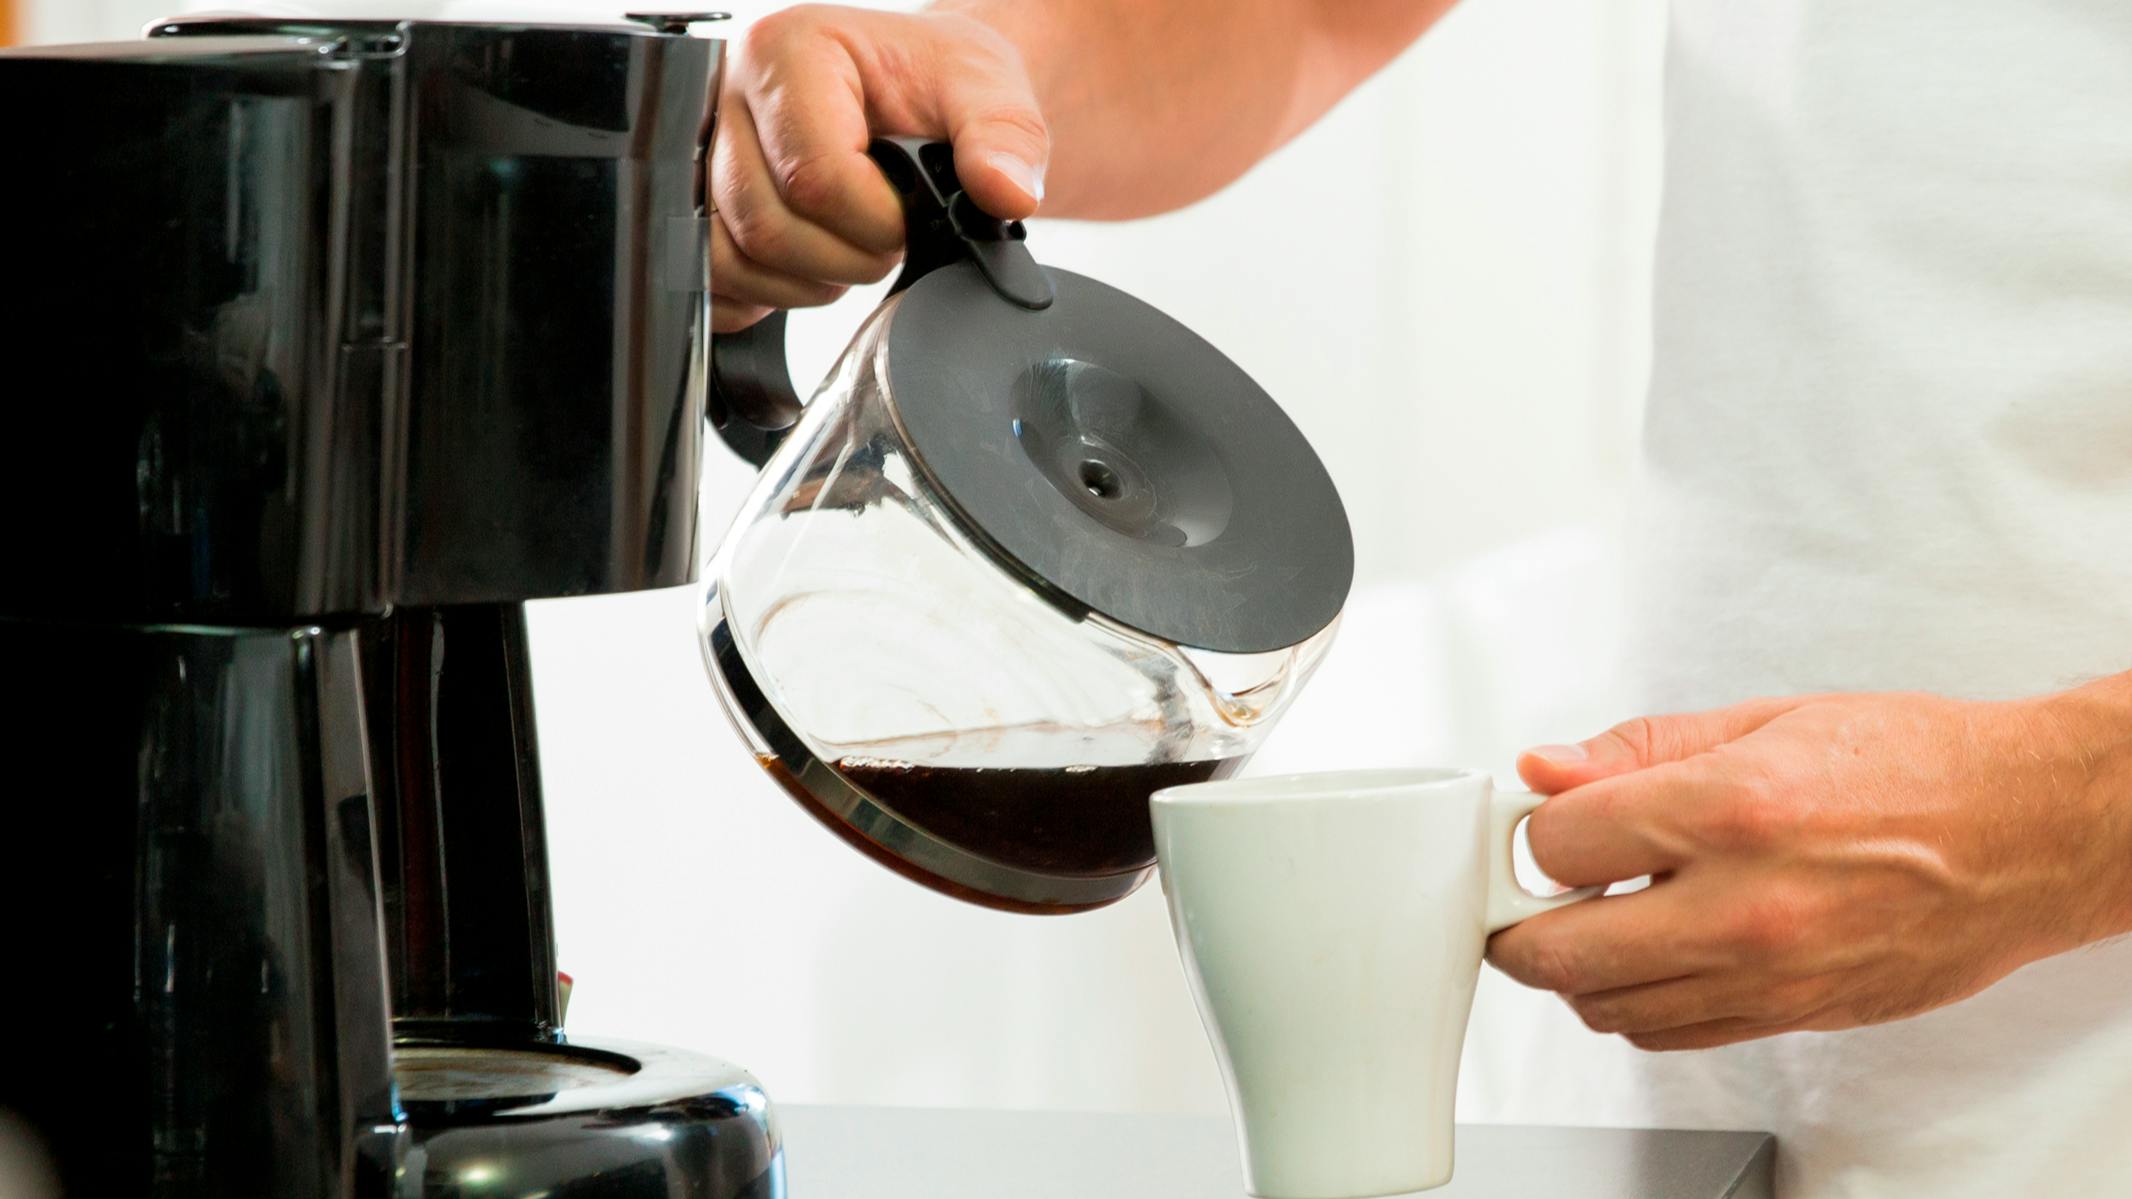 Man in the kitchen pouring a mug of hot filtered coffee from a glass pot.